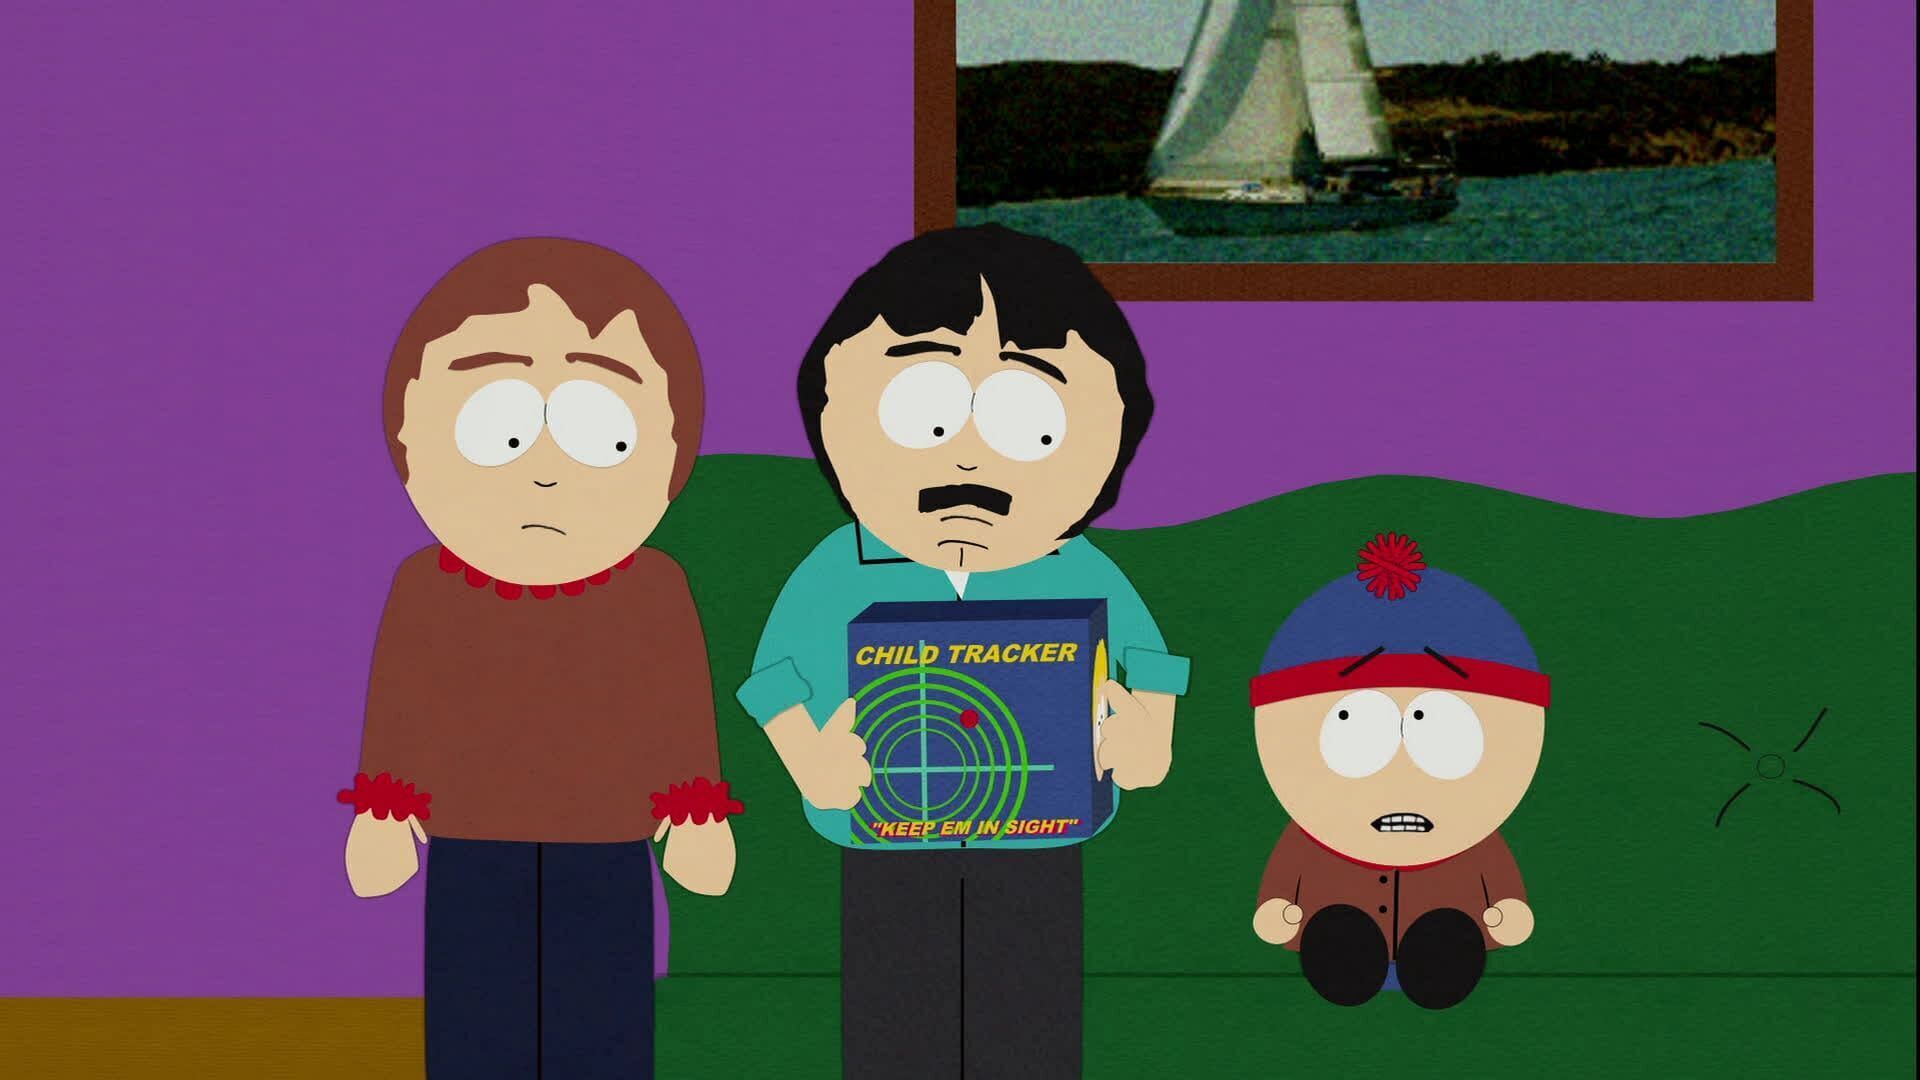 South Park - Child Abduction is Not Funny